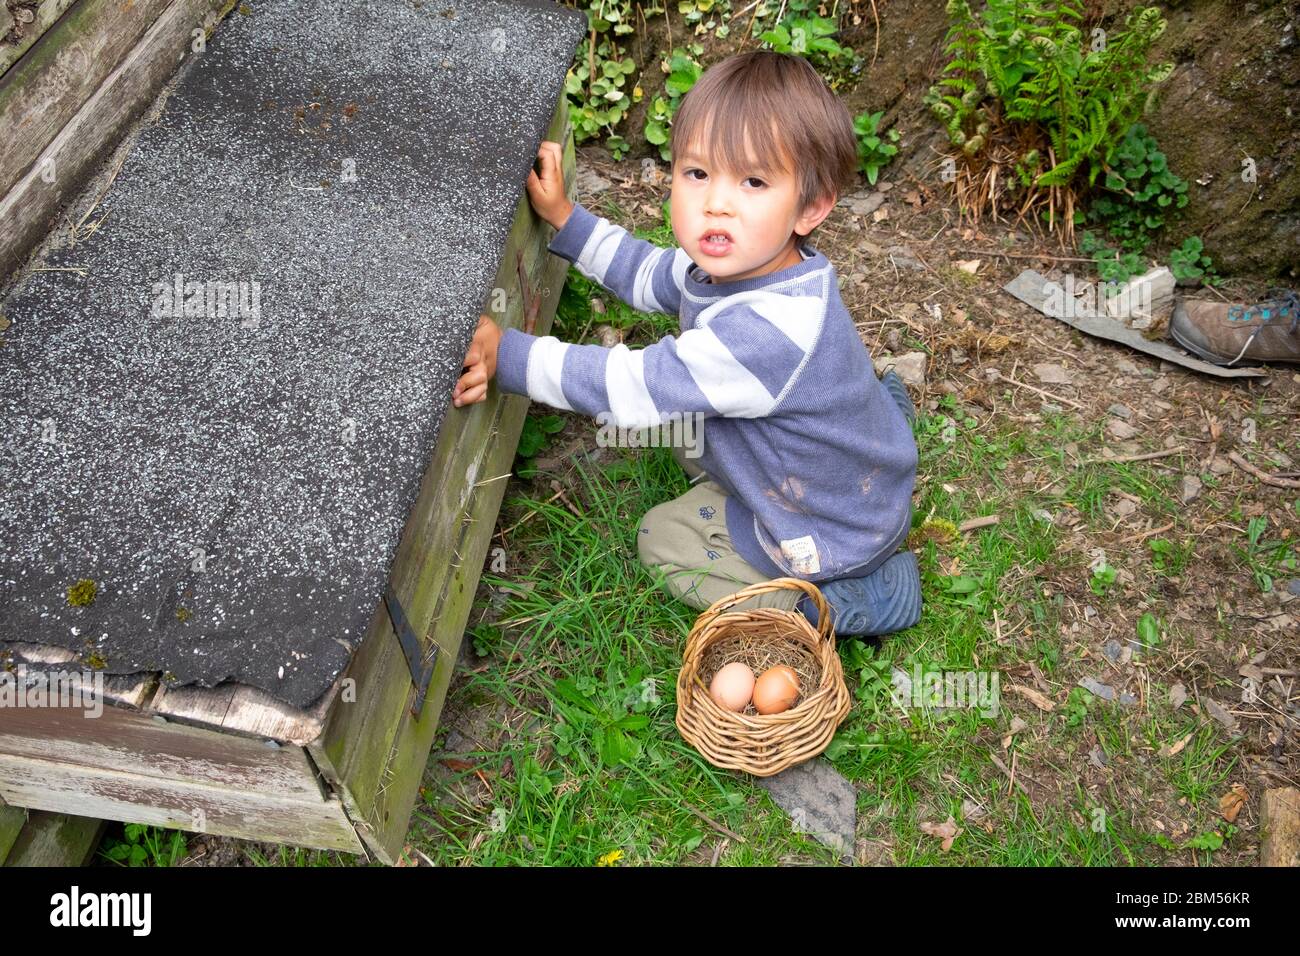 Little boy 3 yrs collecting eggs to put in a basket from a hen house Carmarthenshire Wales UK   KATHY DEWITT Stock Photo